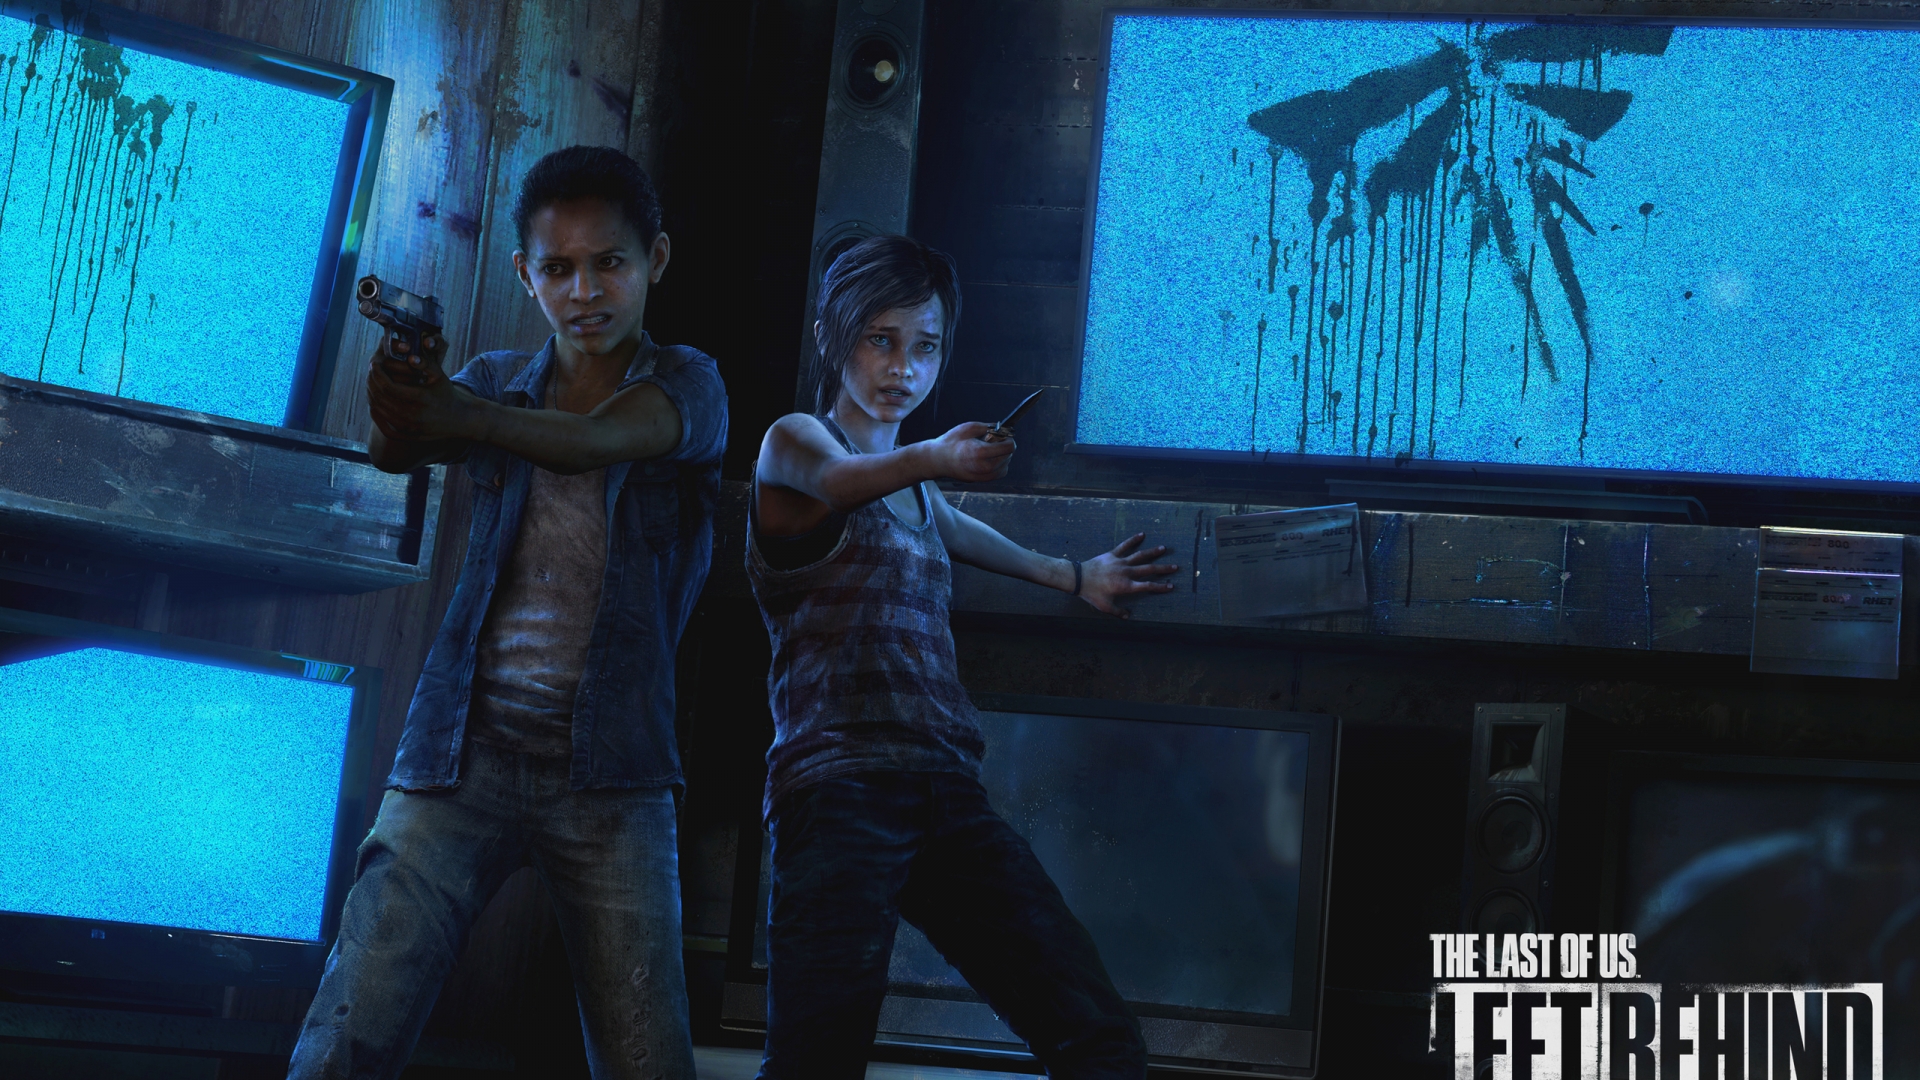 The Last Of Us Left Behind for 1920 x 1080 HDTV 1080p resolution